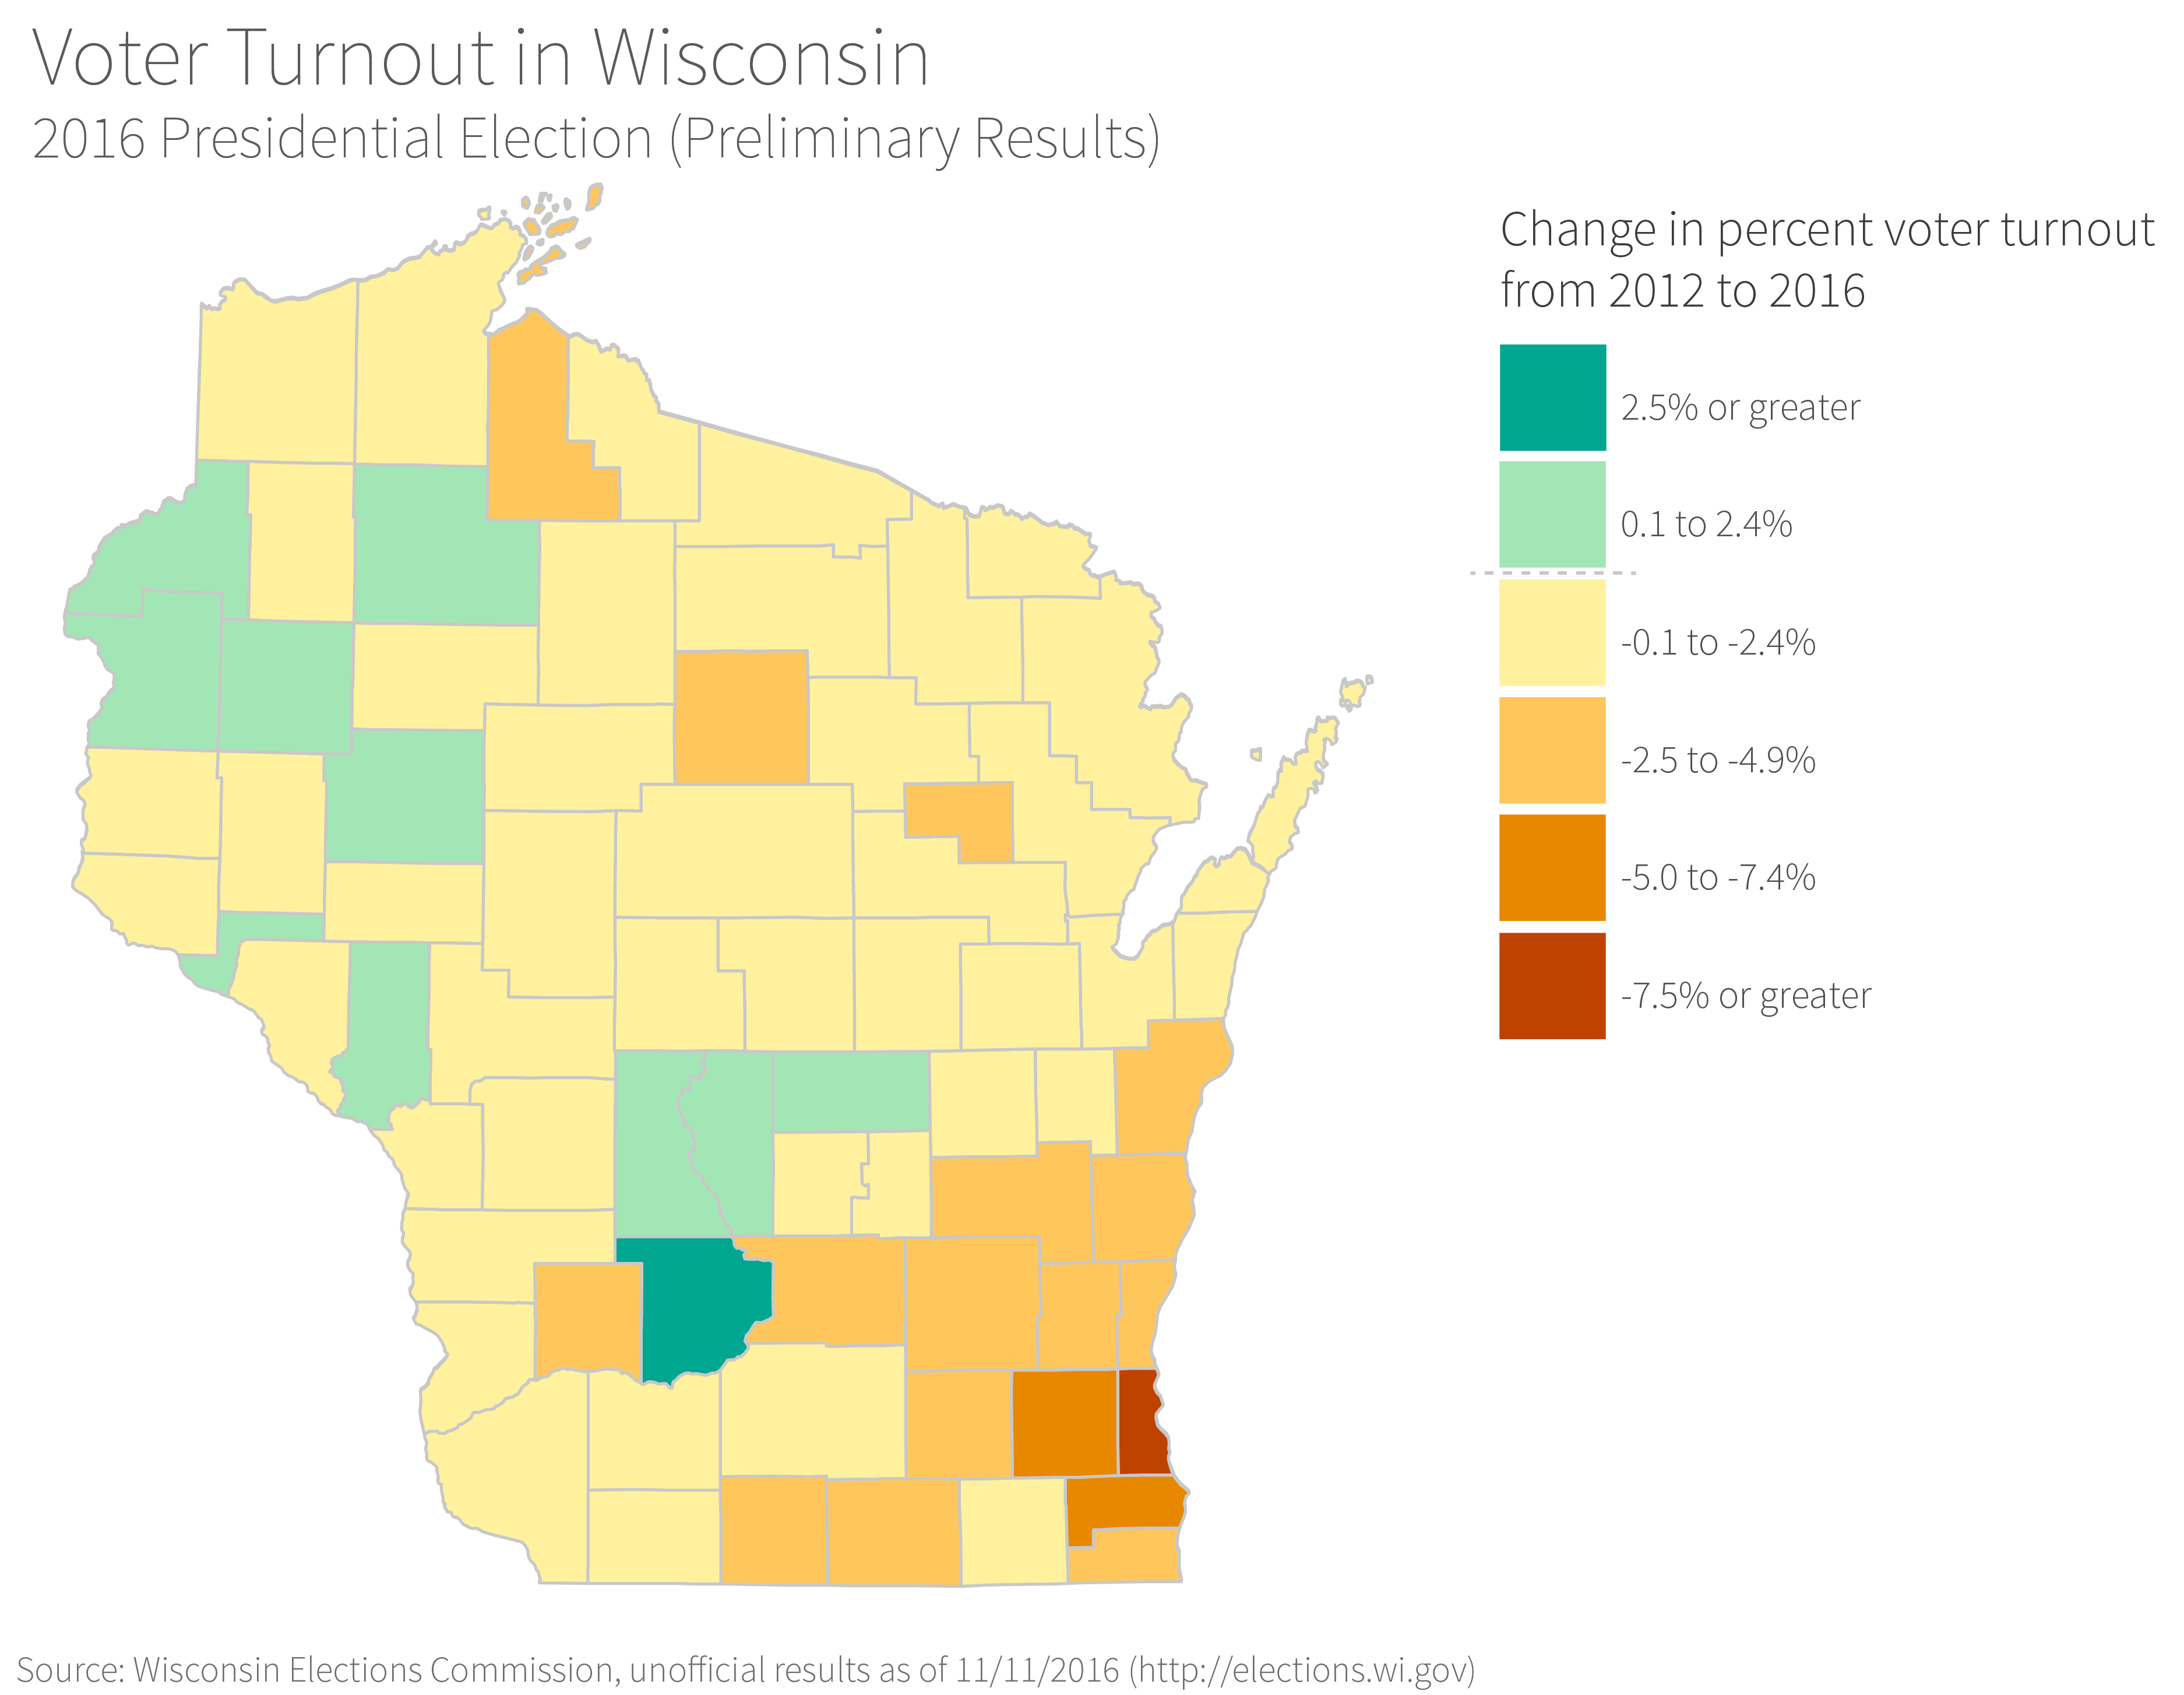 map showing change in voter turnout by Wisconsin counties, 2012 to 2016 presidential elections